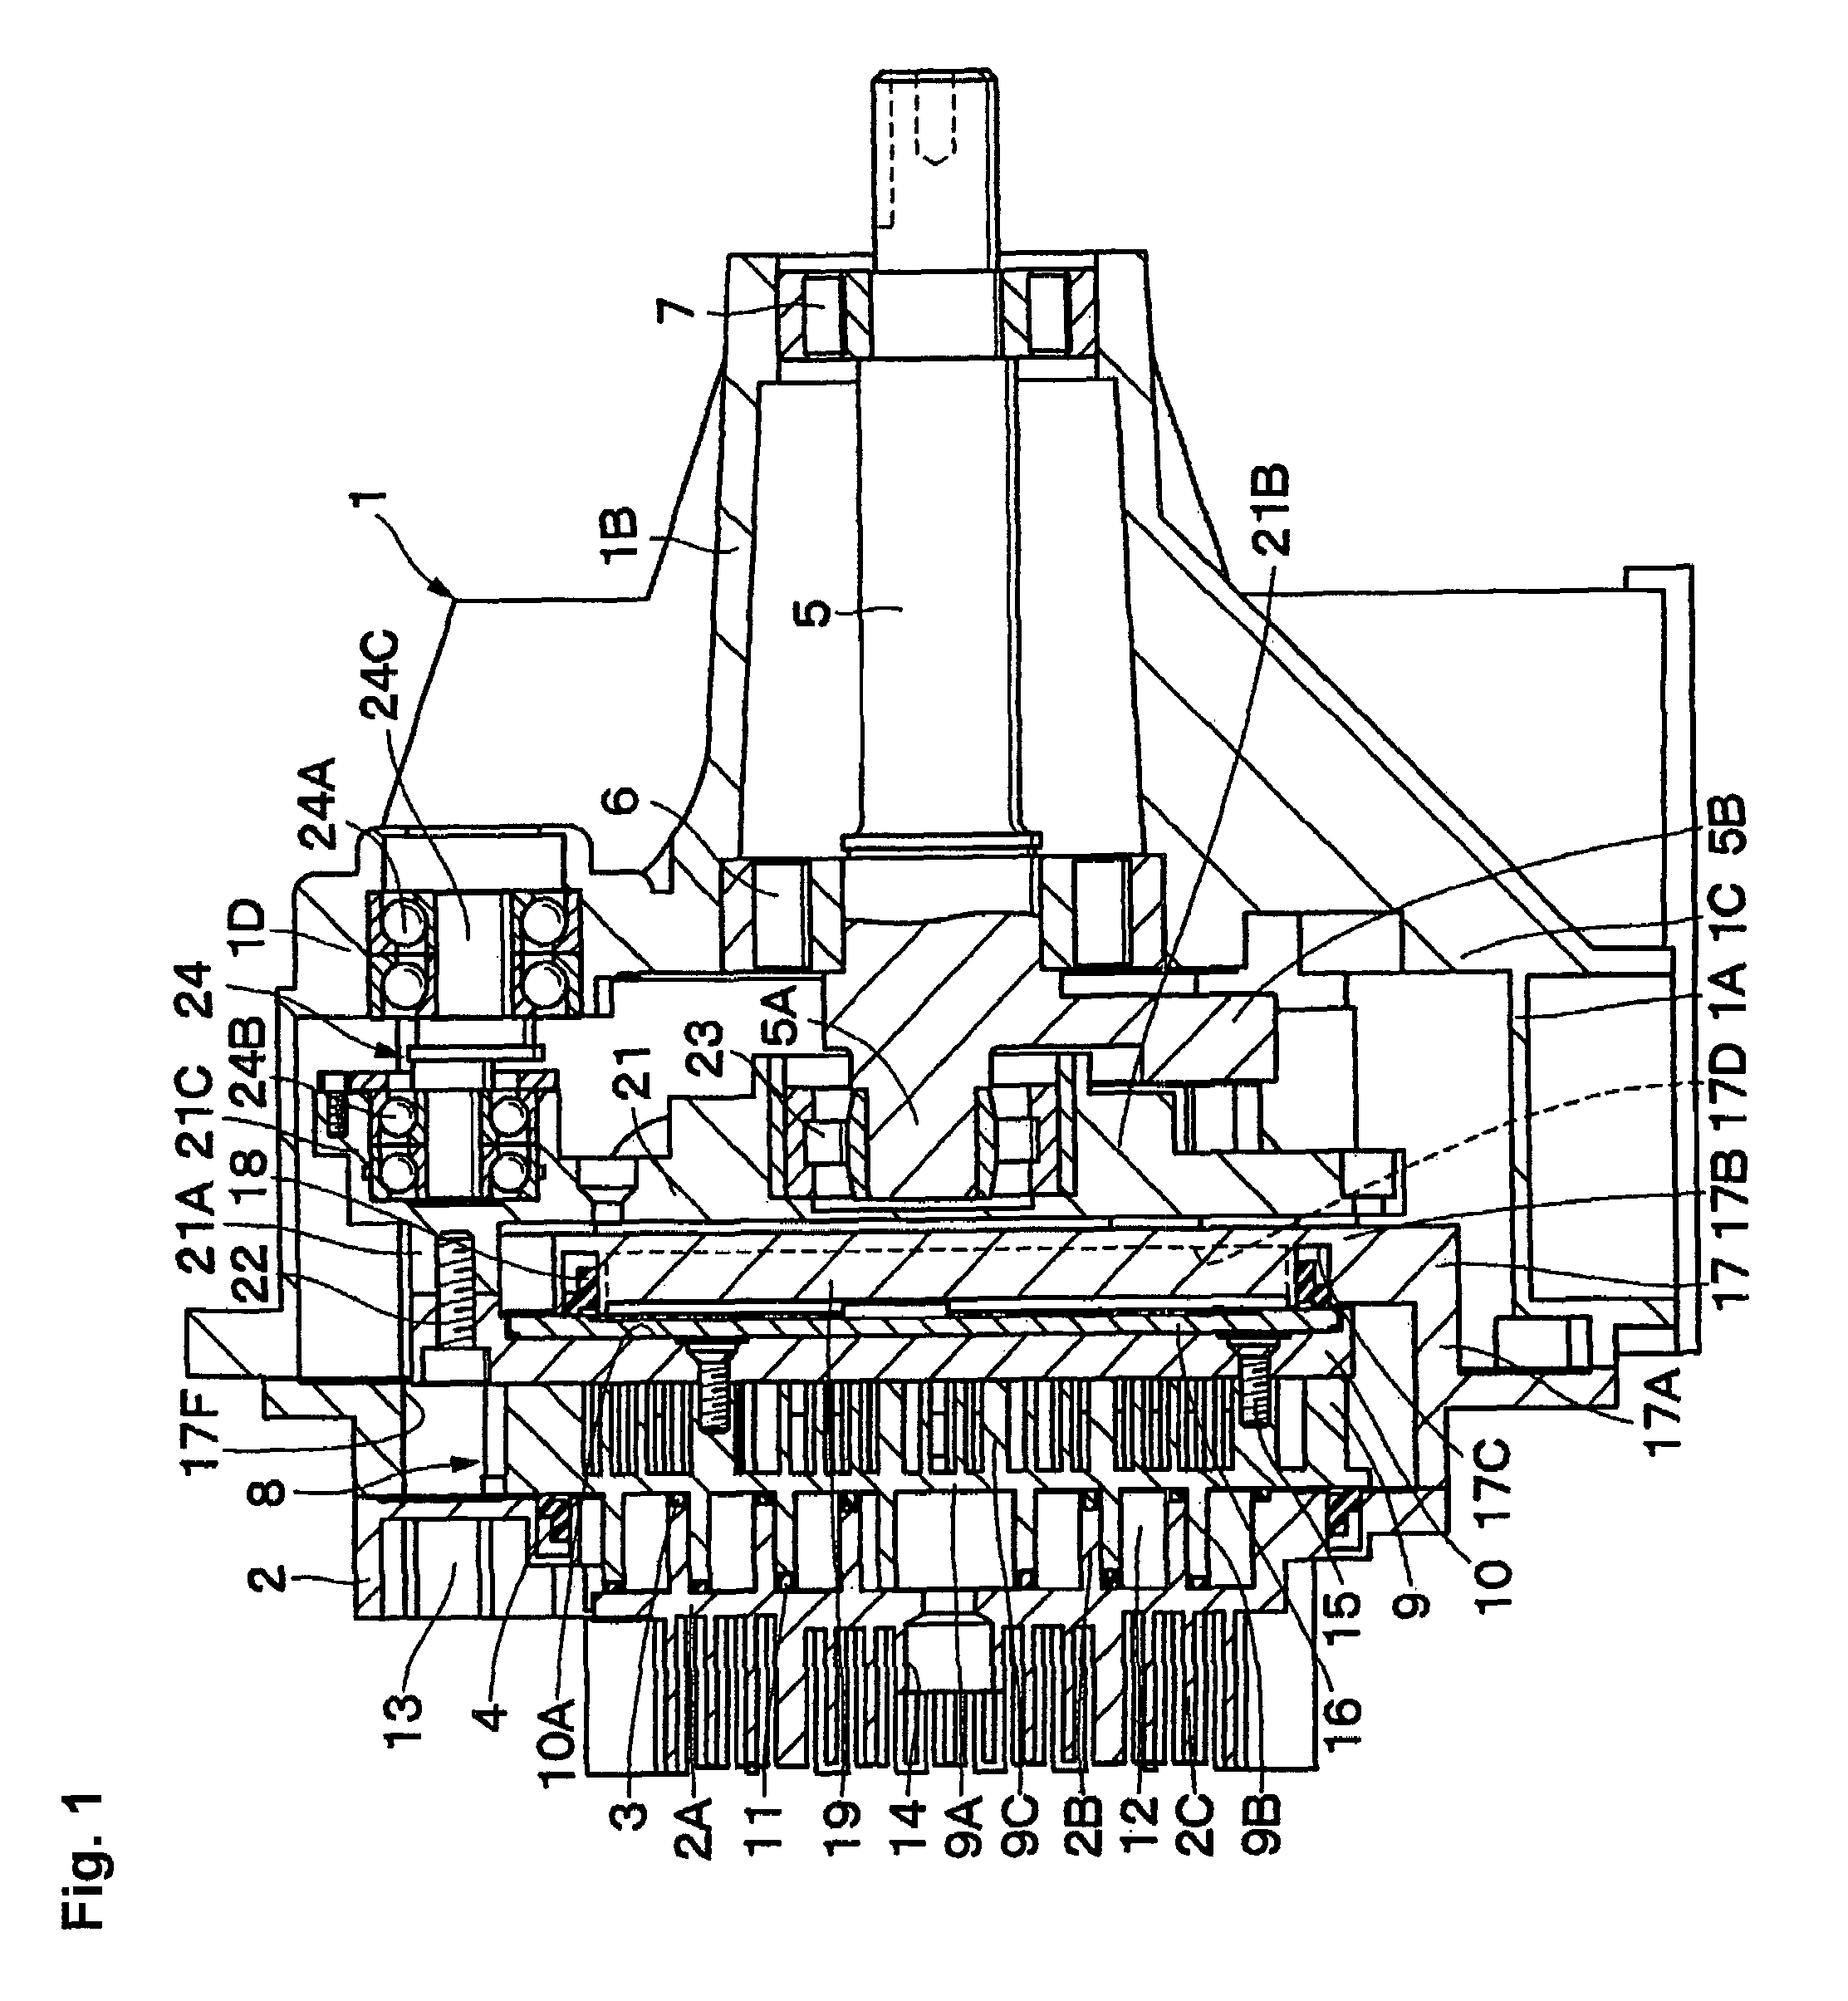 Scroll fluid machine including back-pressure chamber with increased pressure receiving area